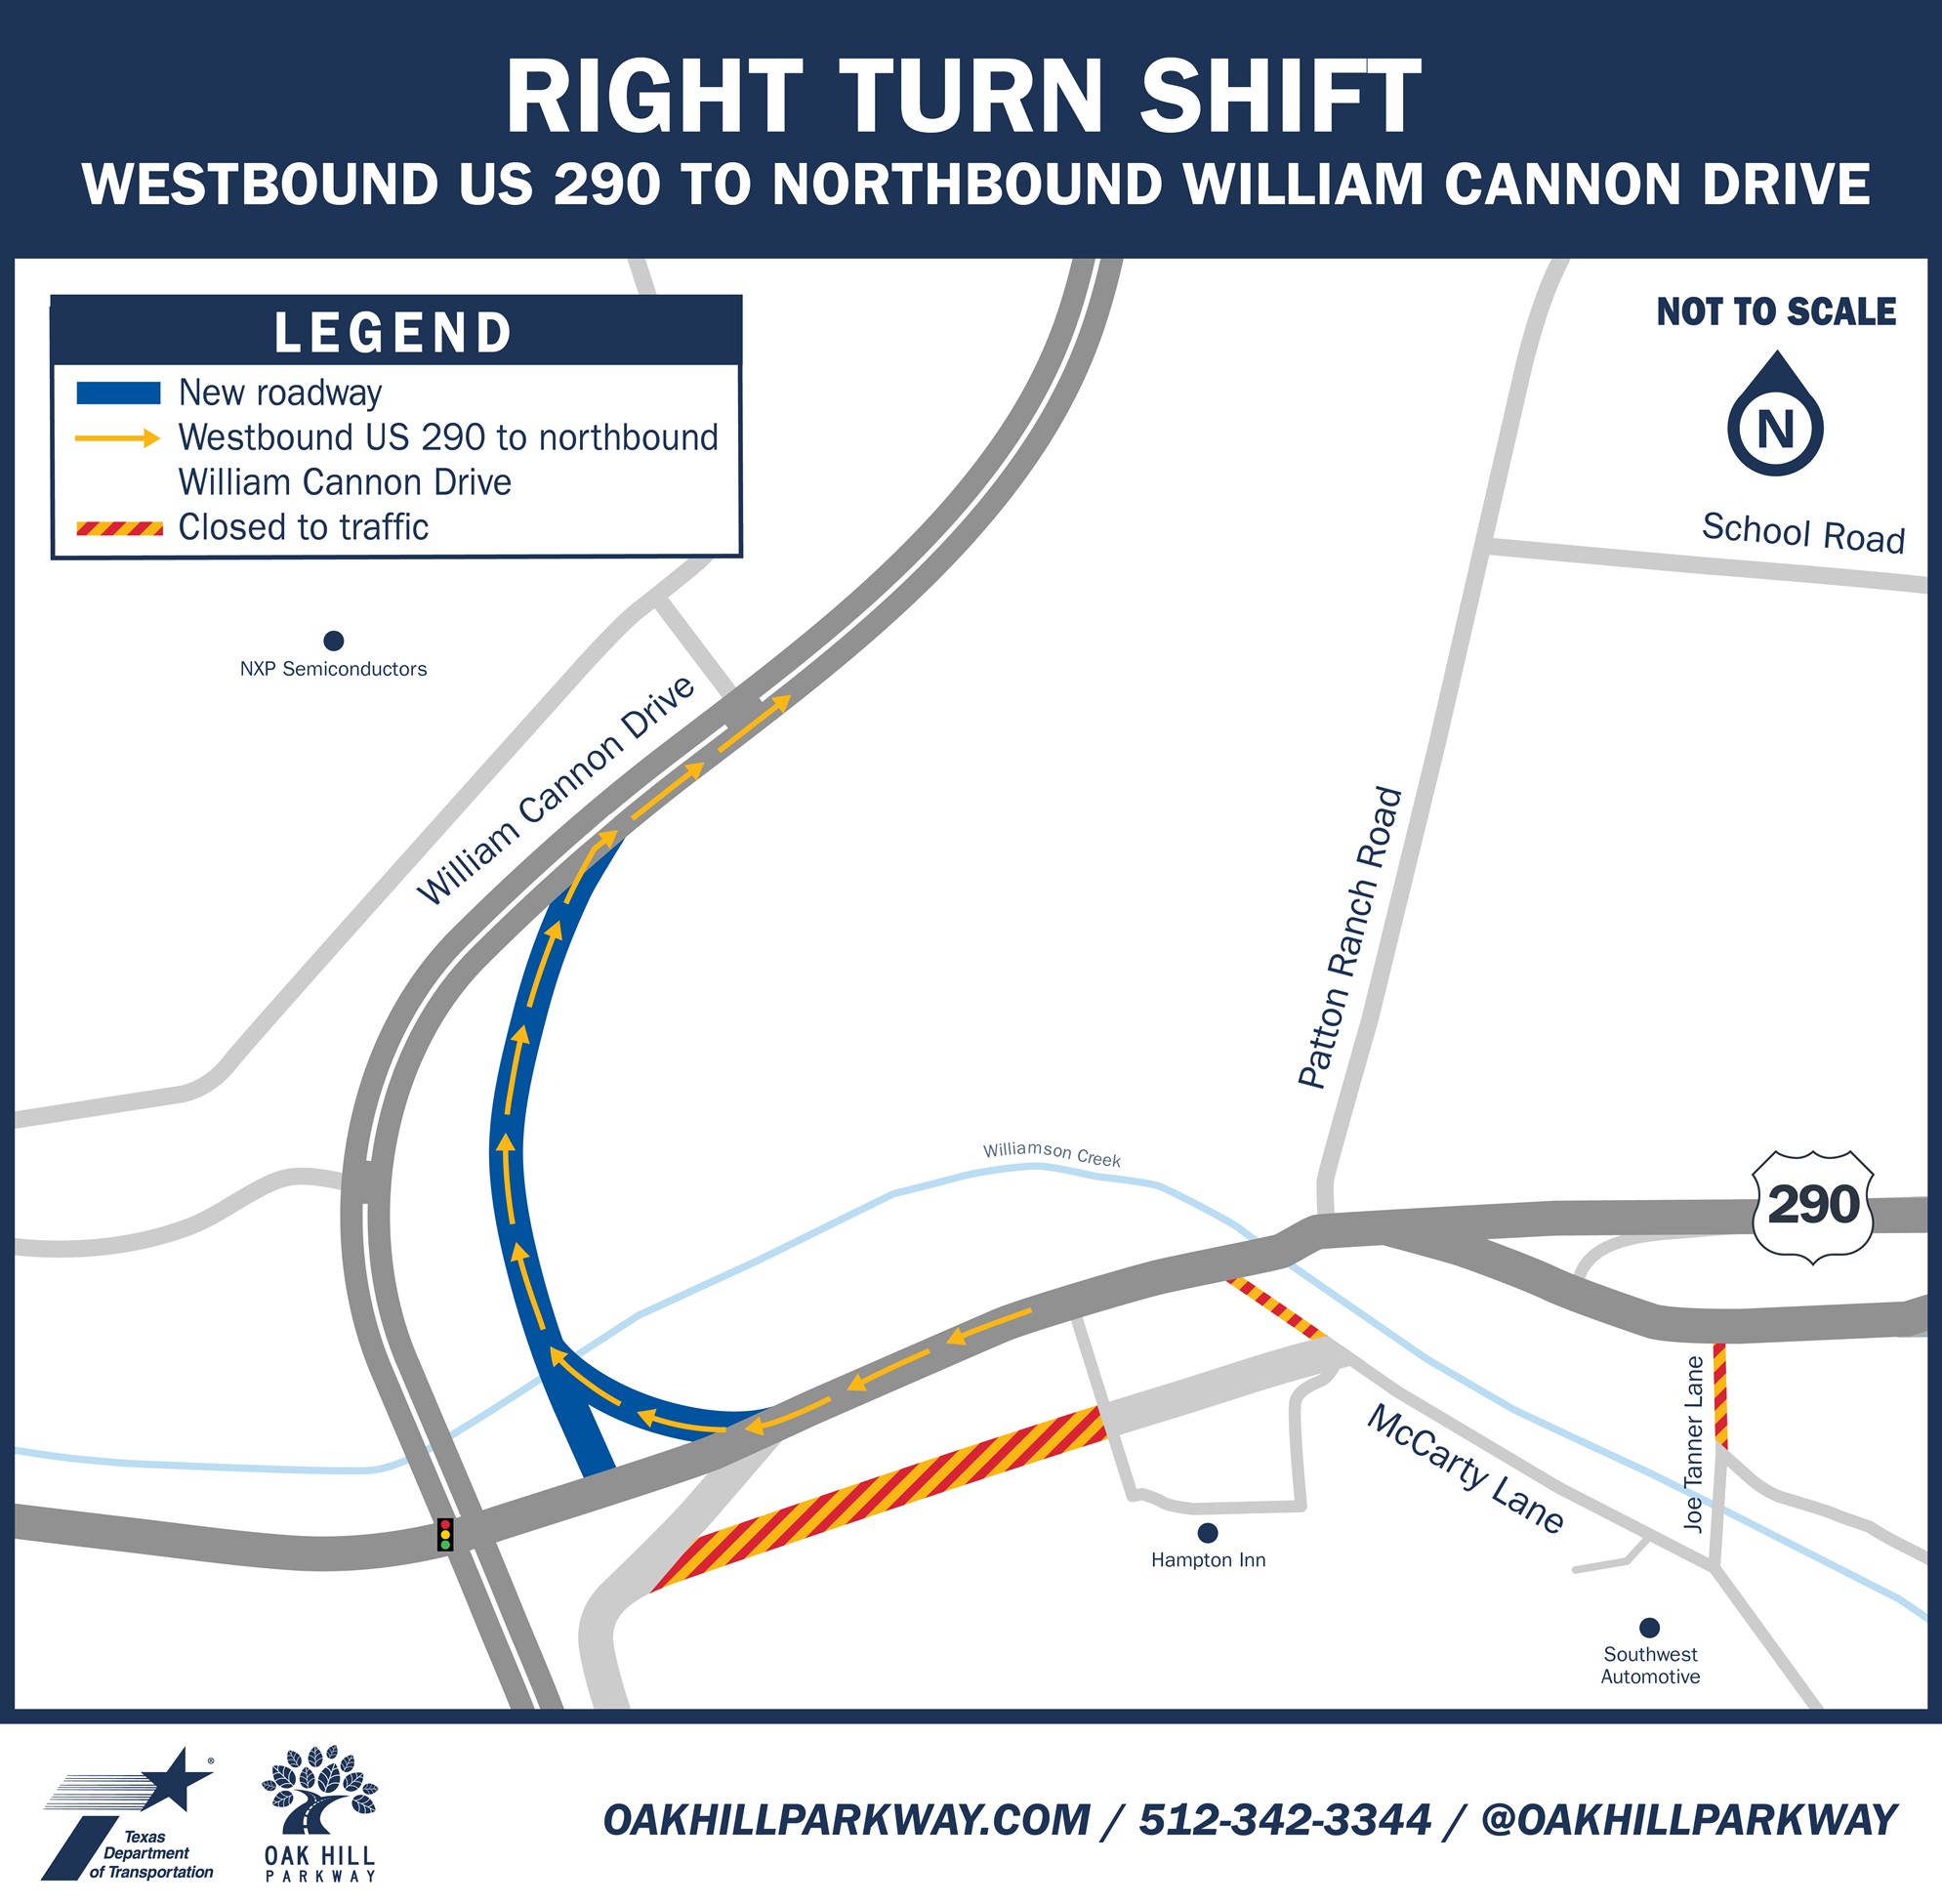 Westbound US 290 to Northbound William Cannon Drive Right Turn Shift Map